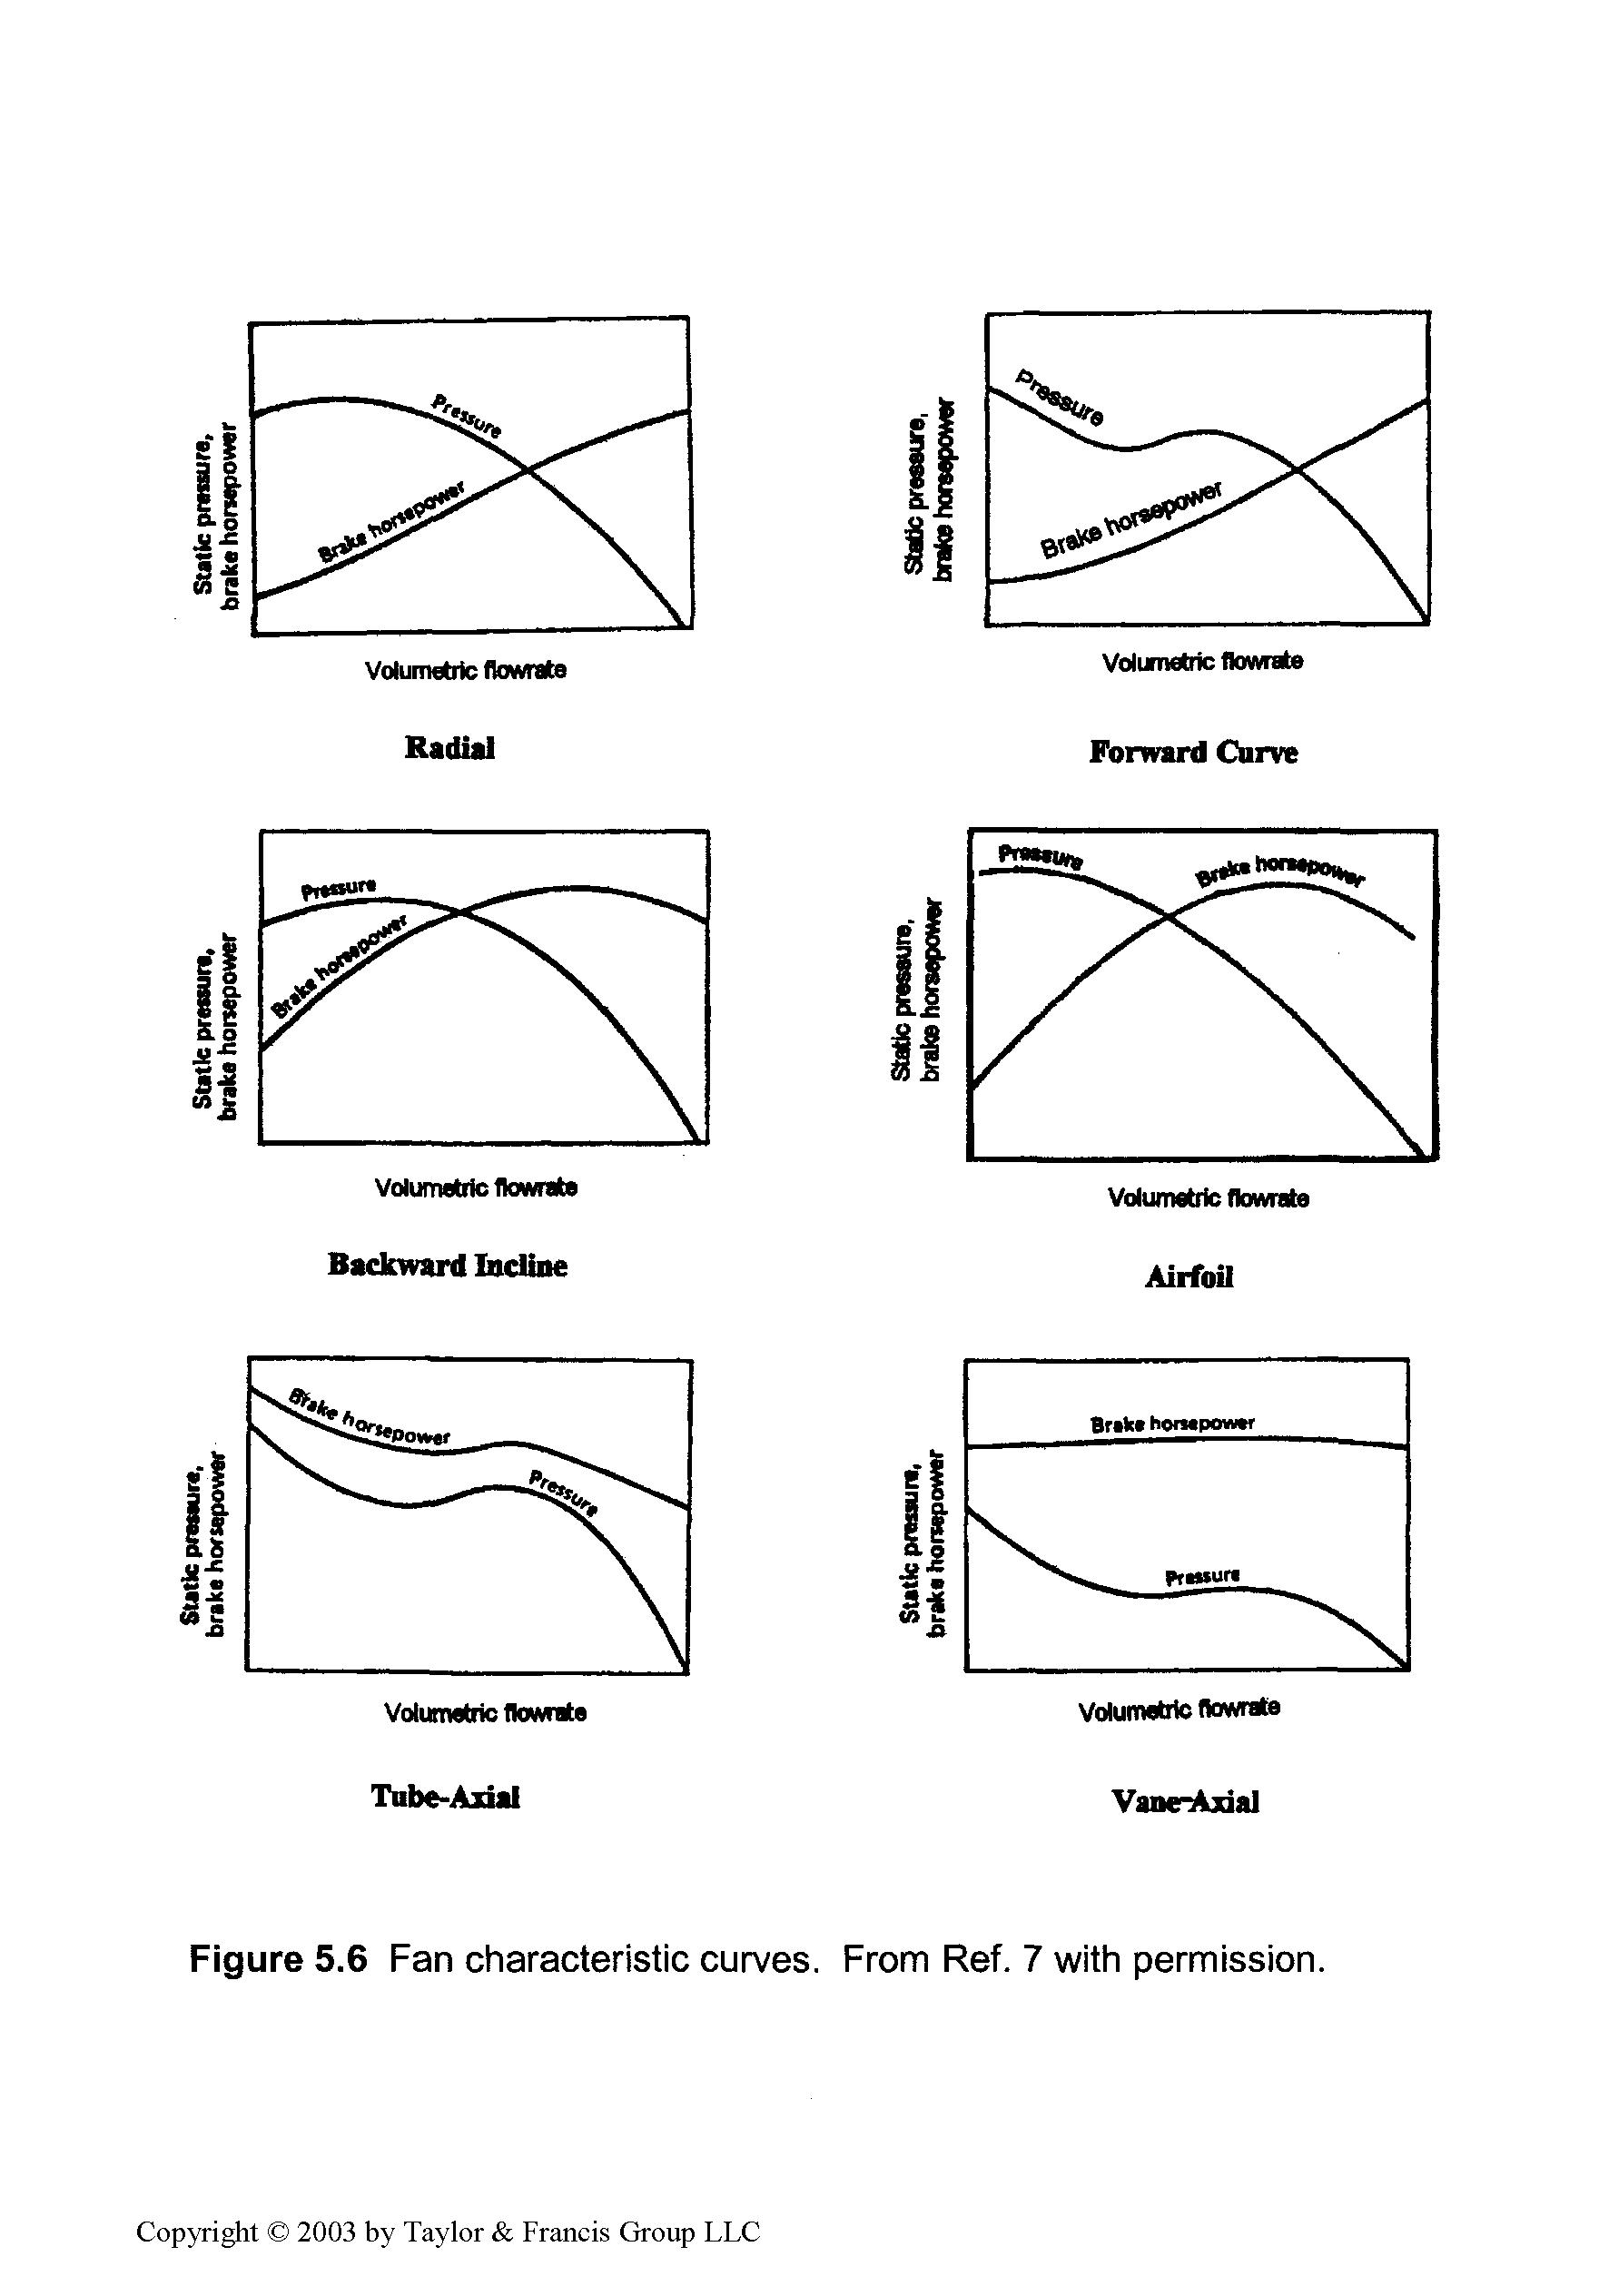 Figure 5.6 Fan characteristic curves. From Ref. 7 with permission.